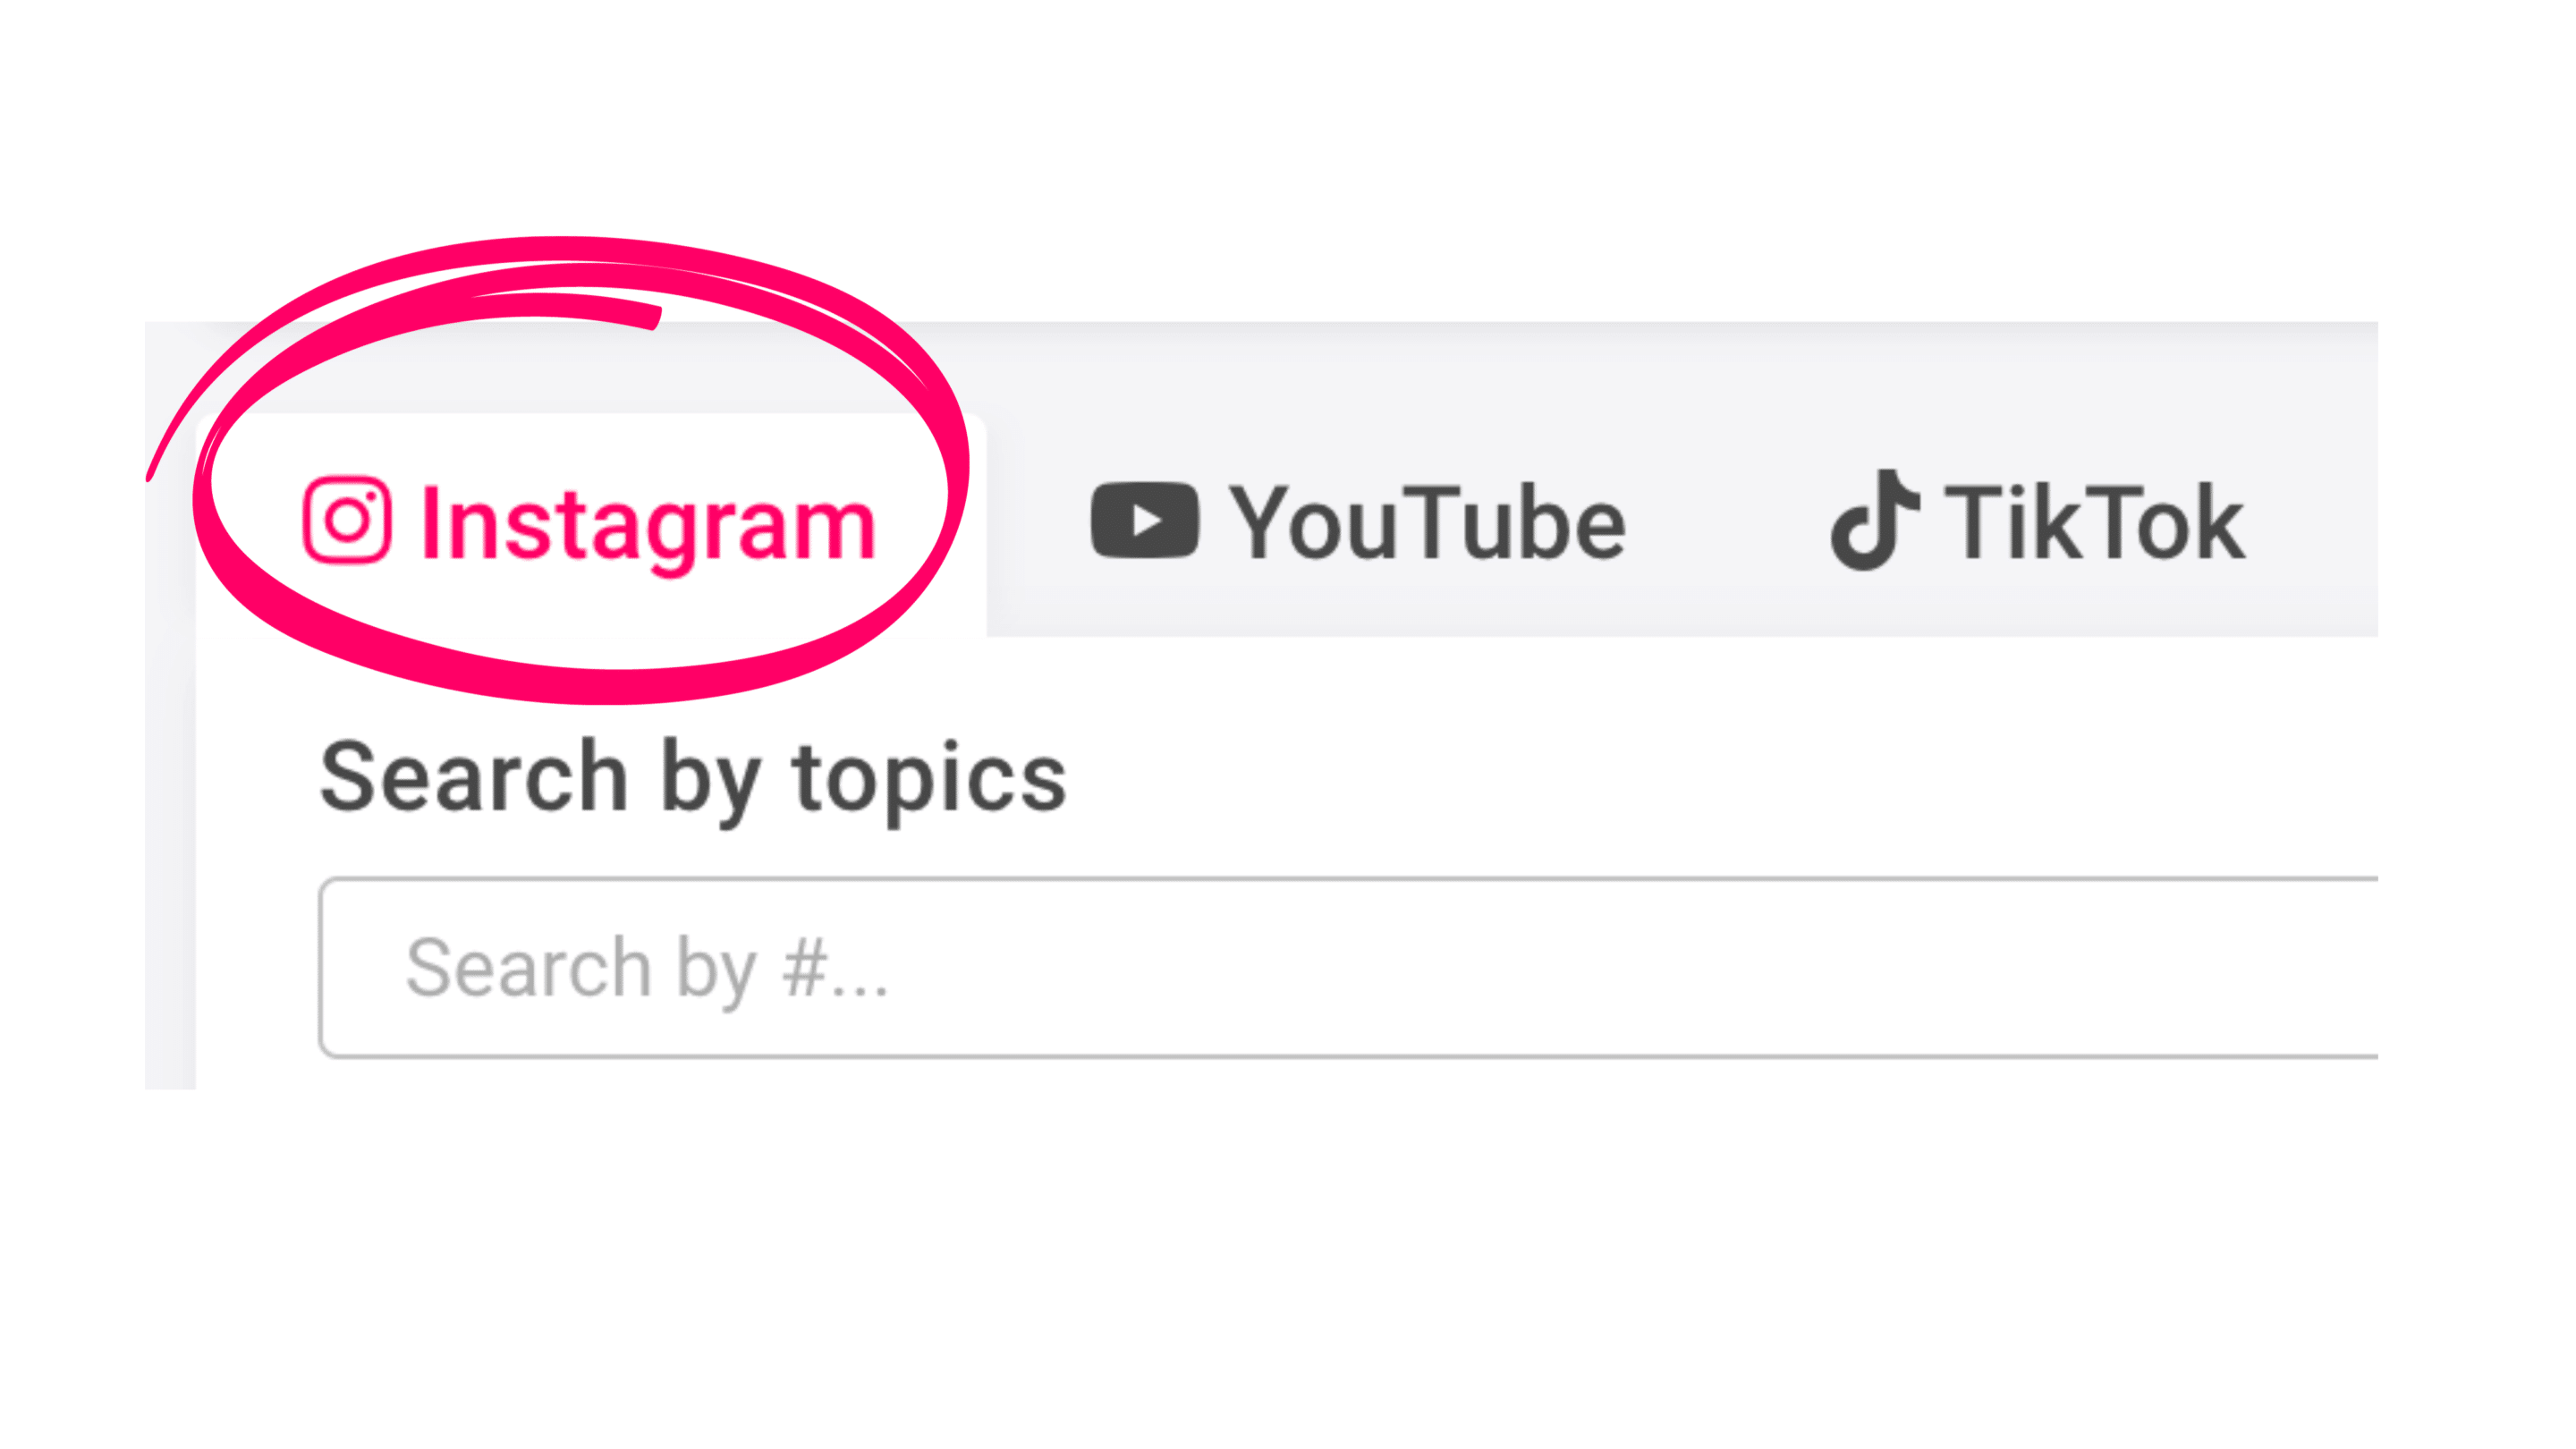 Instagram search by topics.